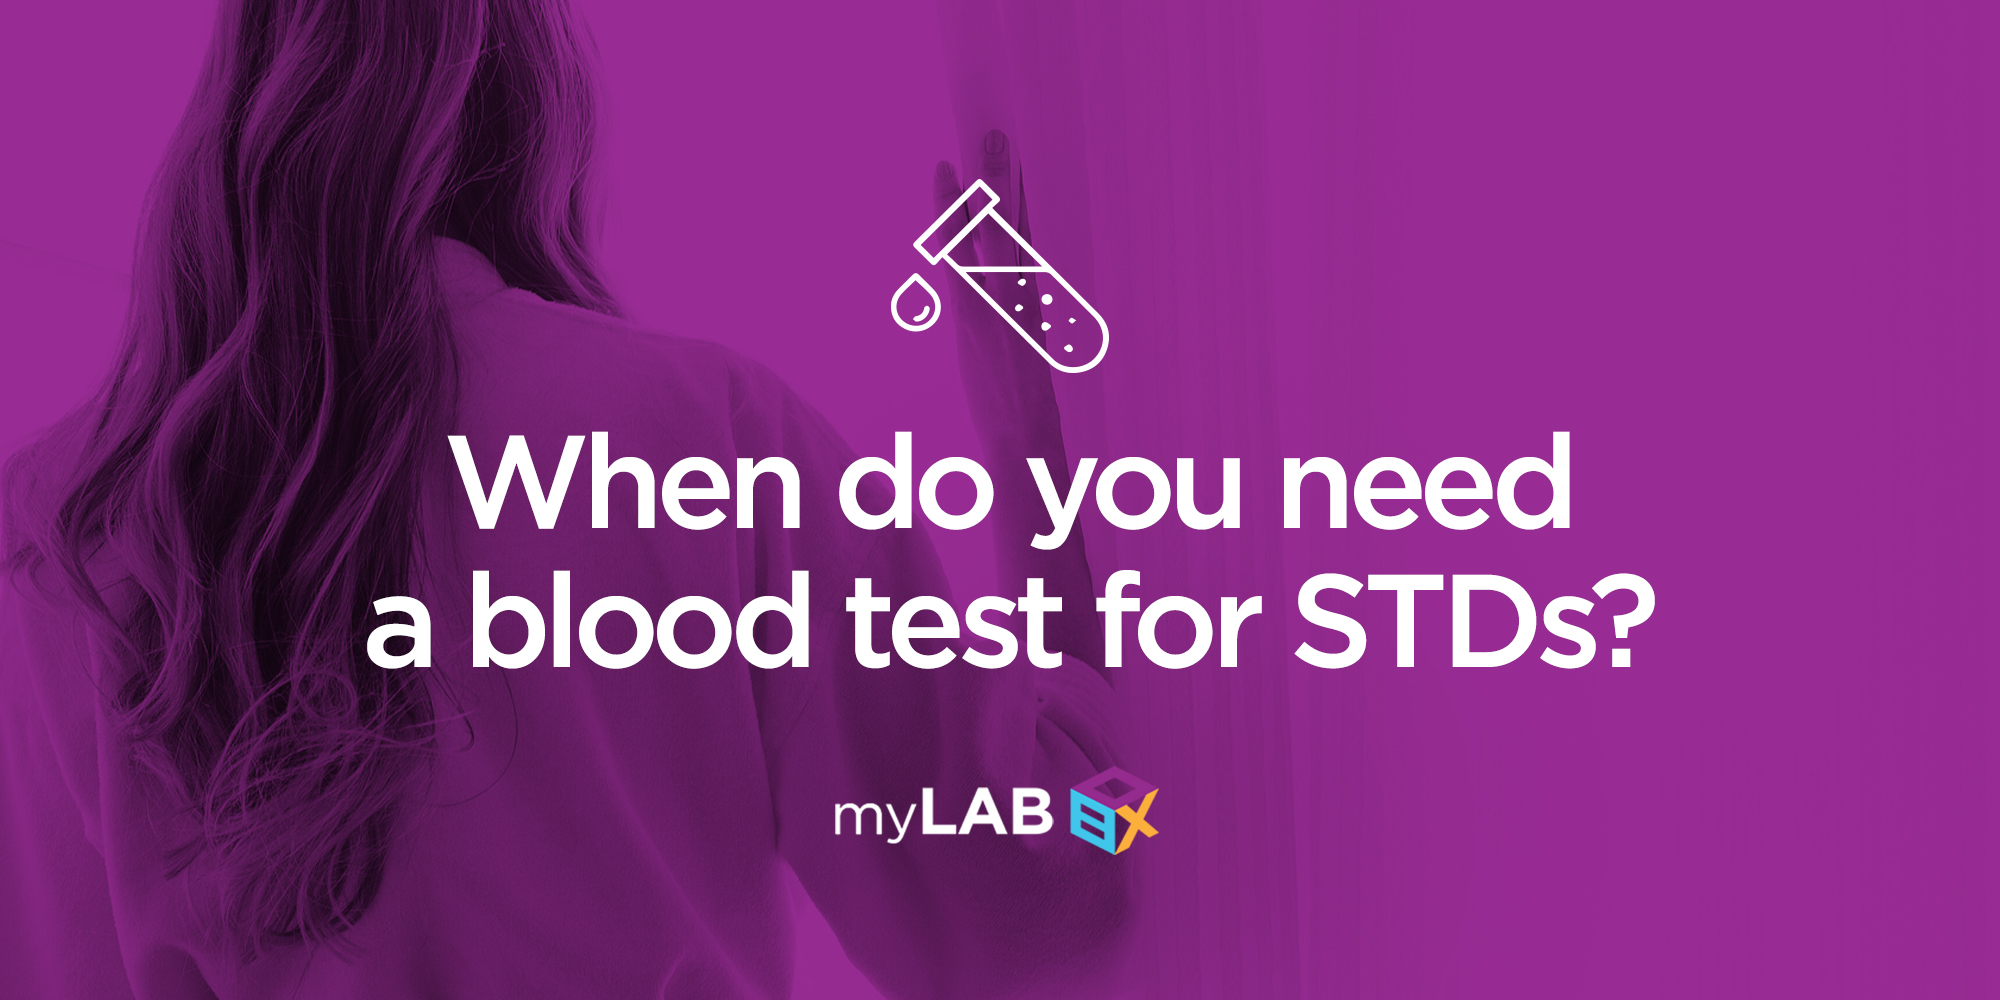 When do you need a blood test for STDs